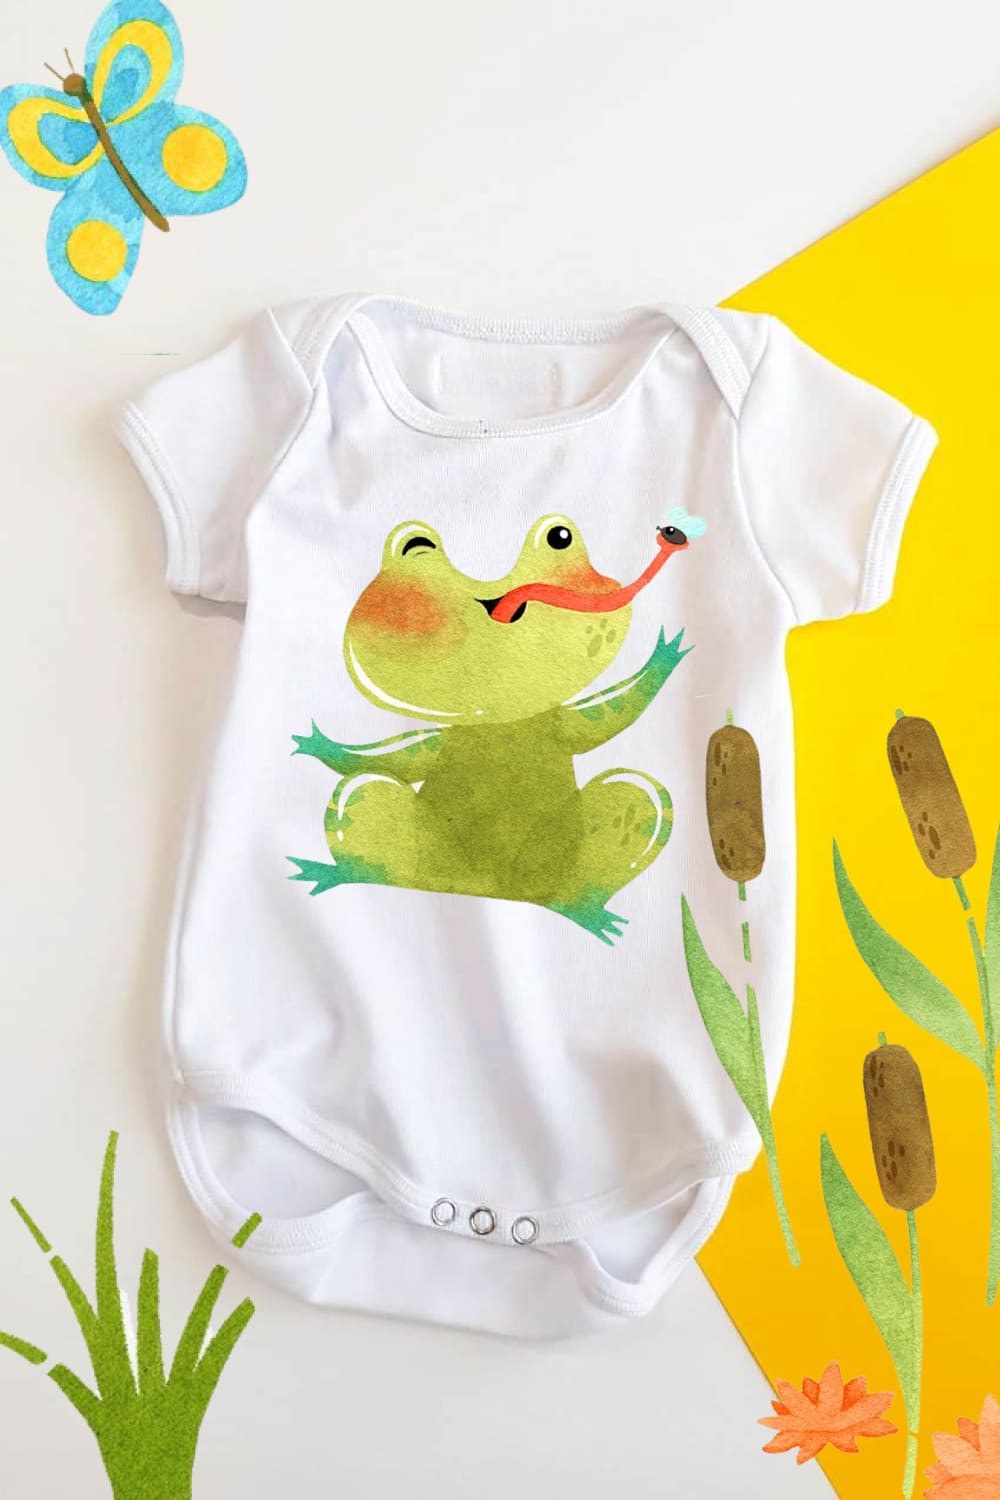 This product included characters, pond flora, seamless patterns and pre-made posters.